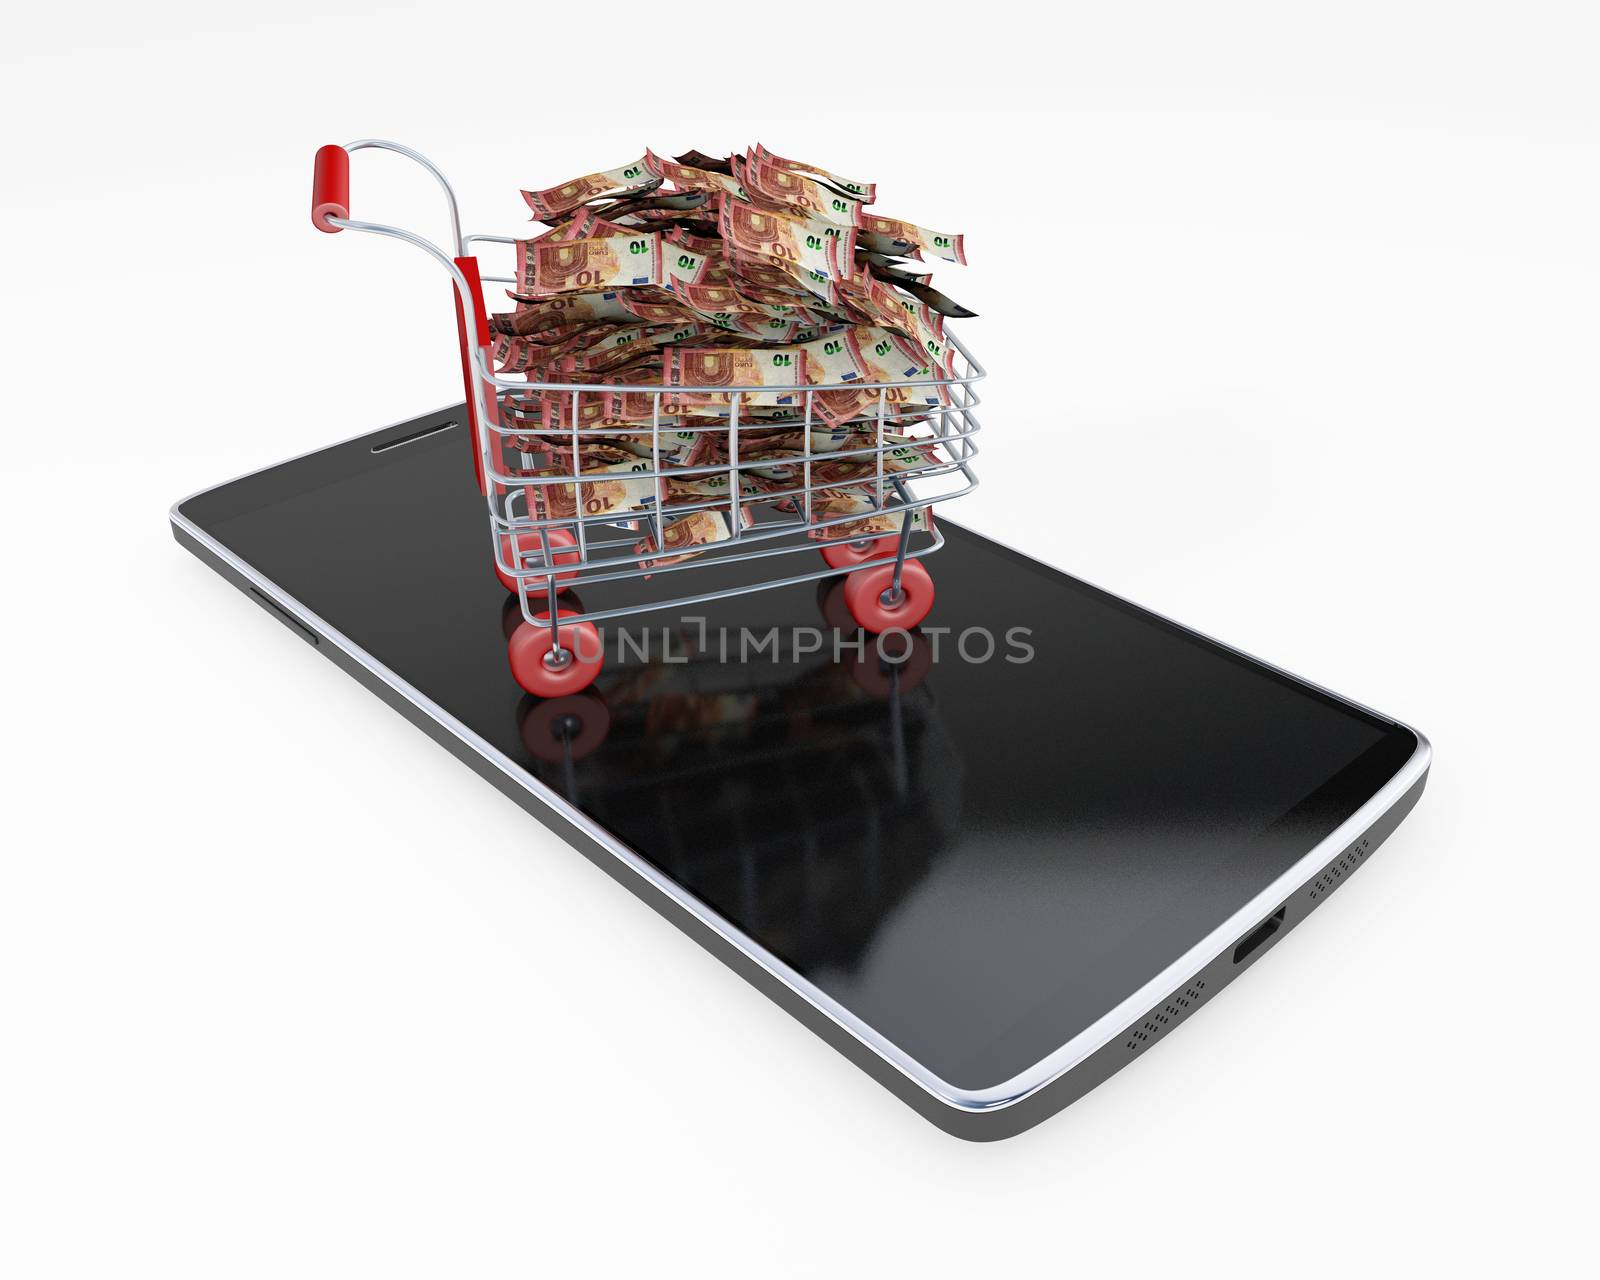 Shopping Cart on a phone full of money euros 3d rendering by F1b0nacci